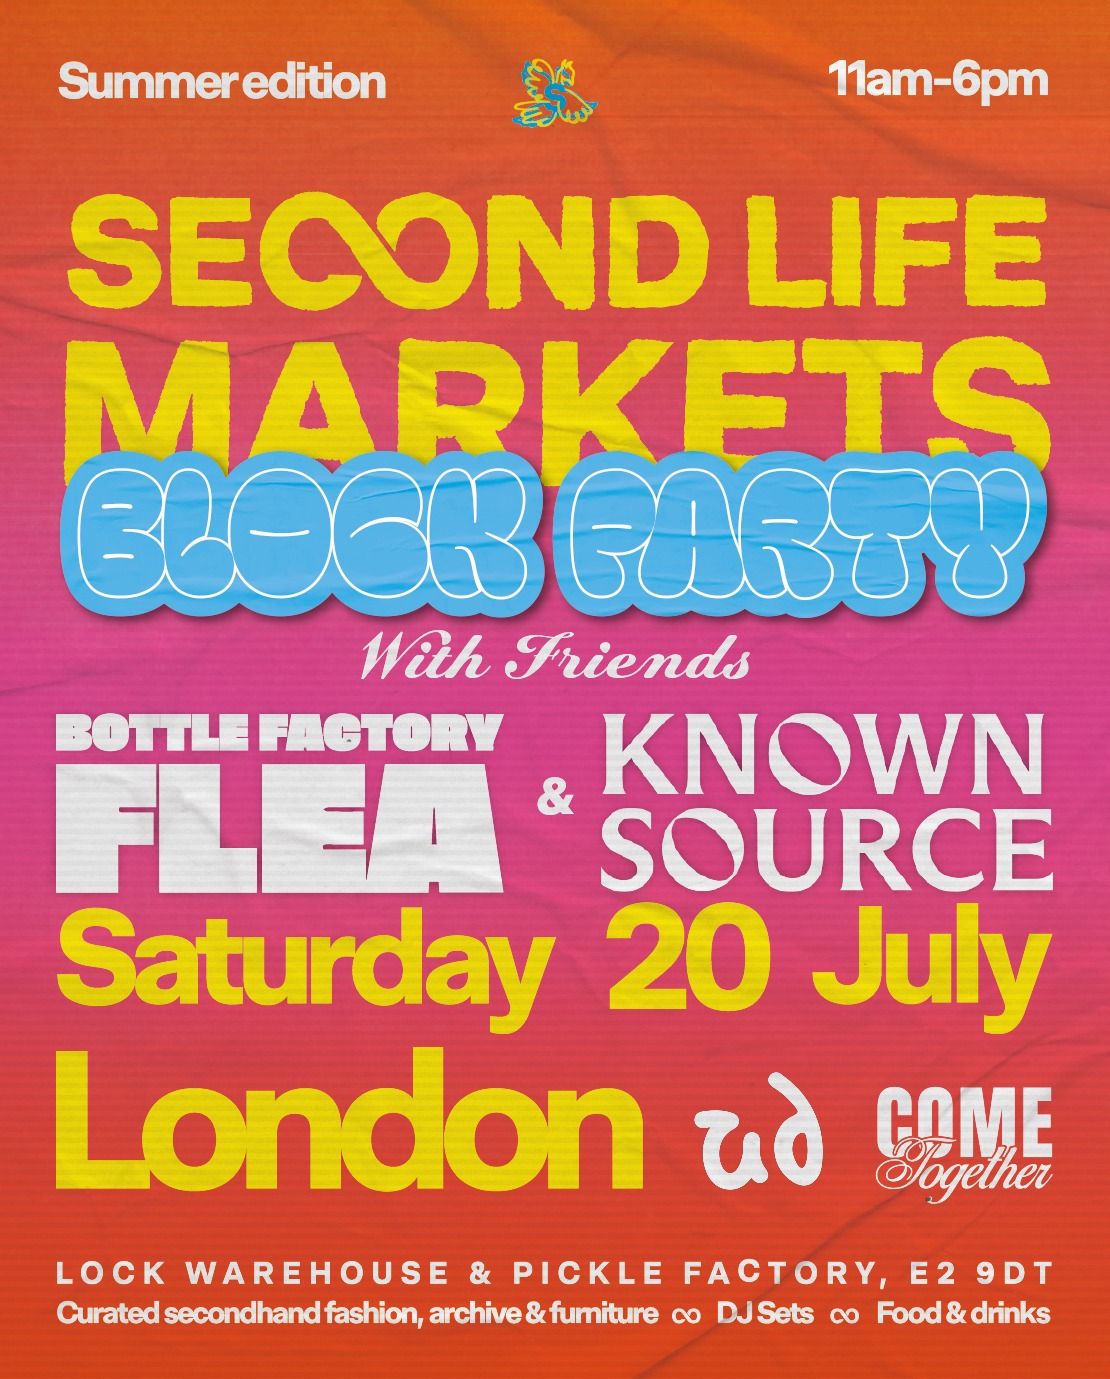 Second Life Markets BLOCK PARTY: With Bottle Factory Flea & Known Source